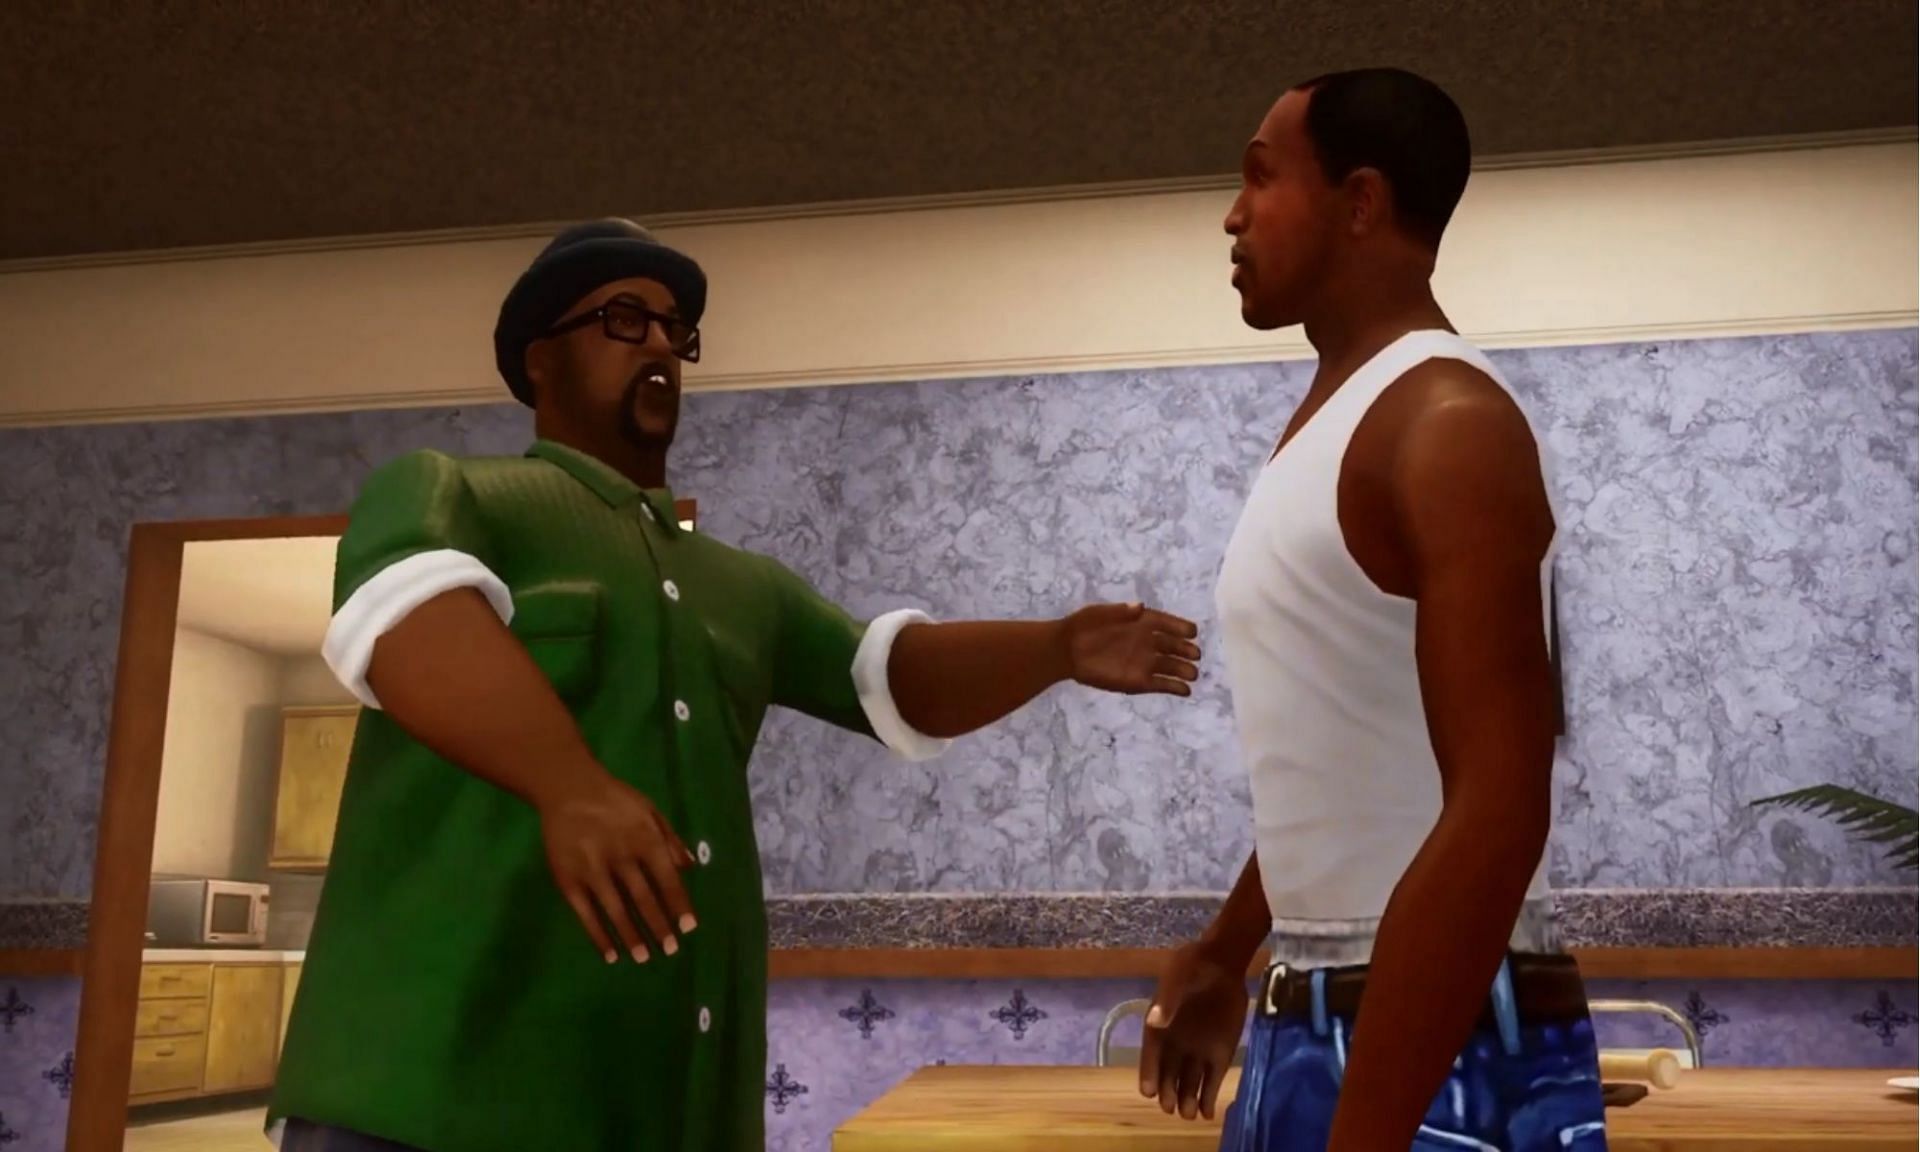 Big Smoke and CJ meet after five years of absence (Image via Rockstar Games)